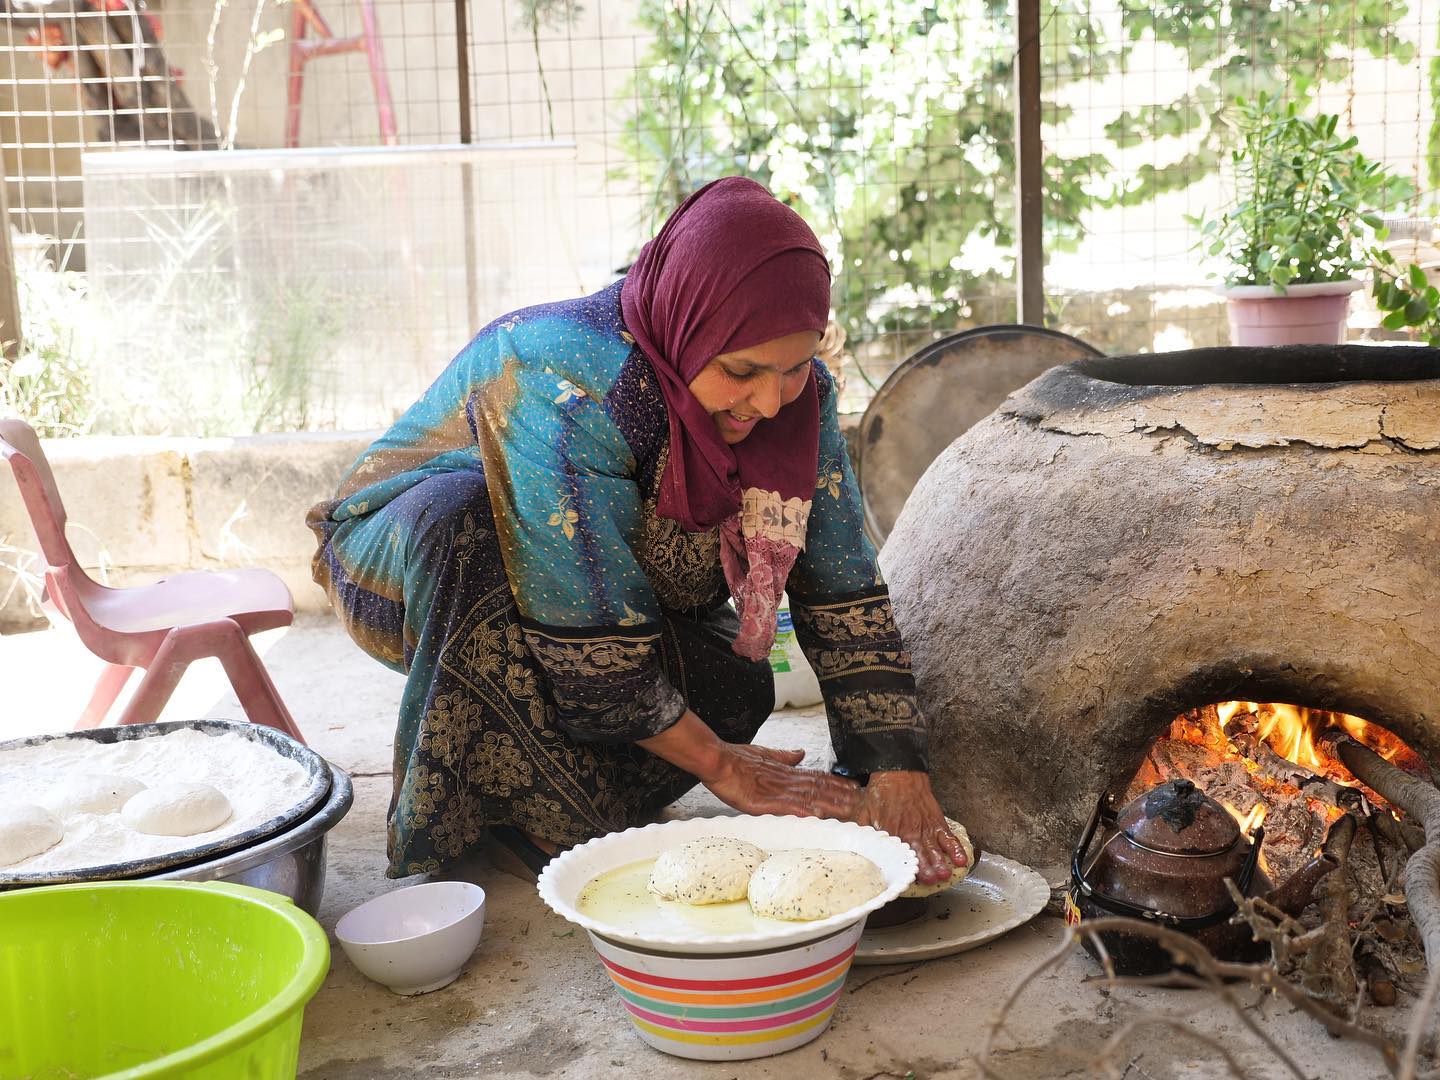 In Ajloun, #Jordan, Khadijah runs her own business, where she engages travellers to experience traditional pottery making and local Taboun and Kusmat bread kneading. 
With support from @nlinjo, we support 85 travel experience providers, like Khadijah, in upgrading their capacities, building their business skills, and marketing their experiences to travellers. In doing so, we promote a more sustainable, inclusive, and diversified #tourism sector in #Jordan. 
#sustainabletourism #tourismvaluechain #tourismdevelopment #experientialtravel #localcommunity